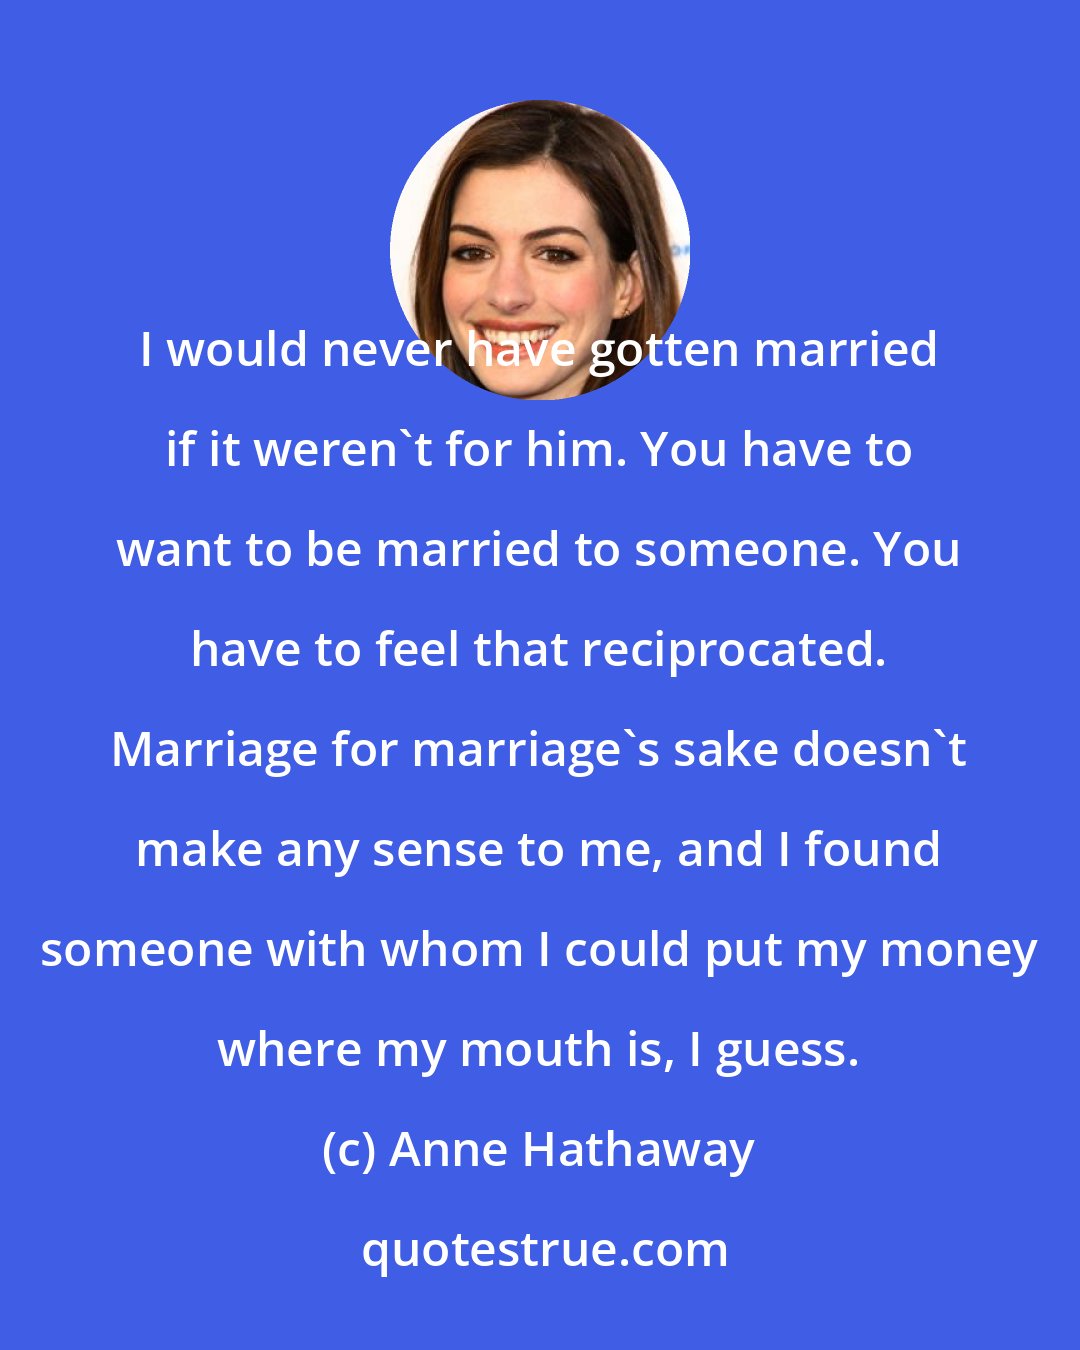 Anne Hathaway: I would never have gotten married if it weren't for him. You have to want to be married to someone. You have to feel that reciprocated. Marriage for marriage's sake doesn't make any sense to me, and I found someone with whom I could put my money where my mouth is, I guess.